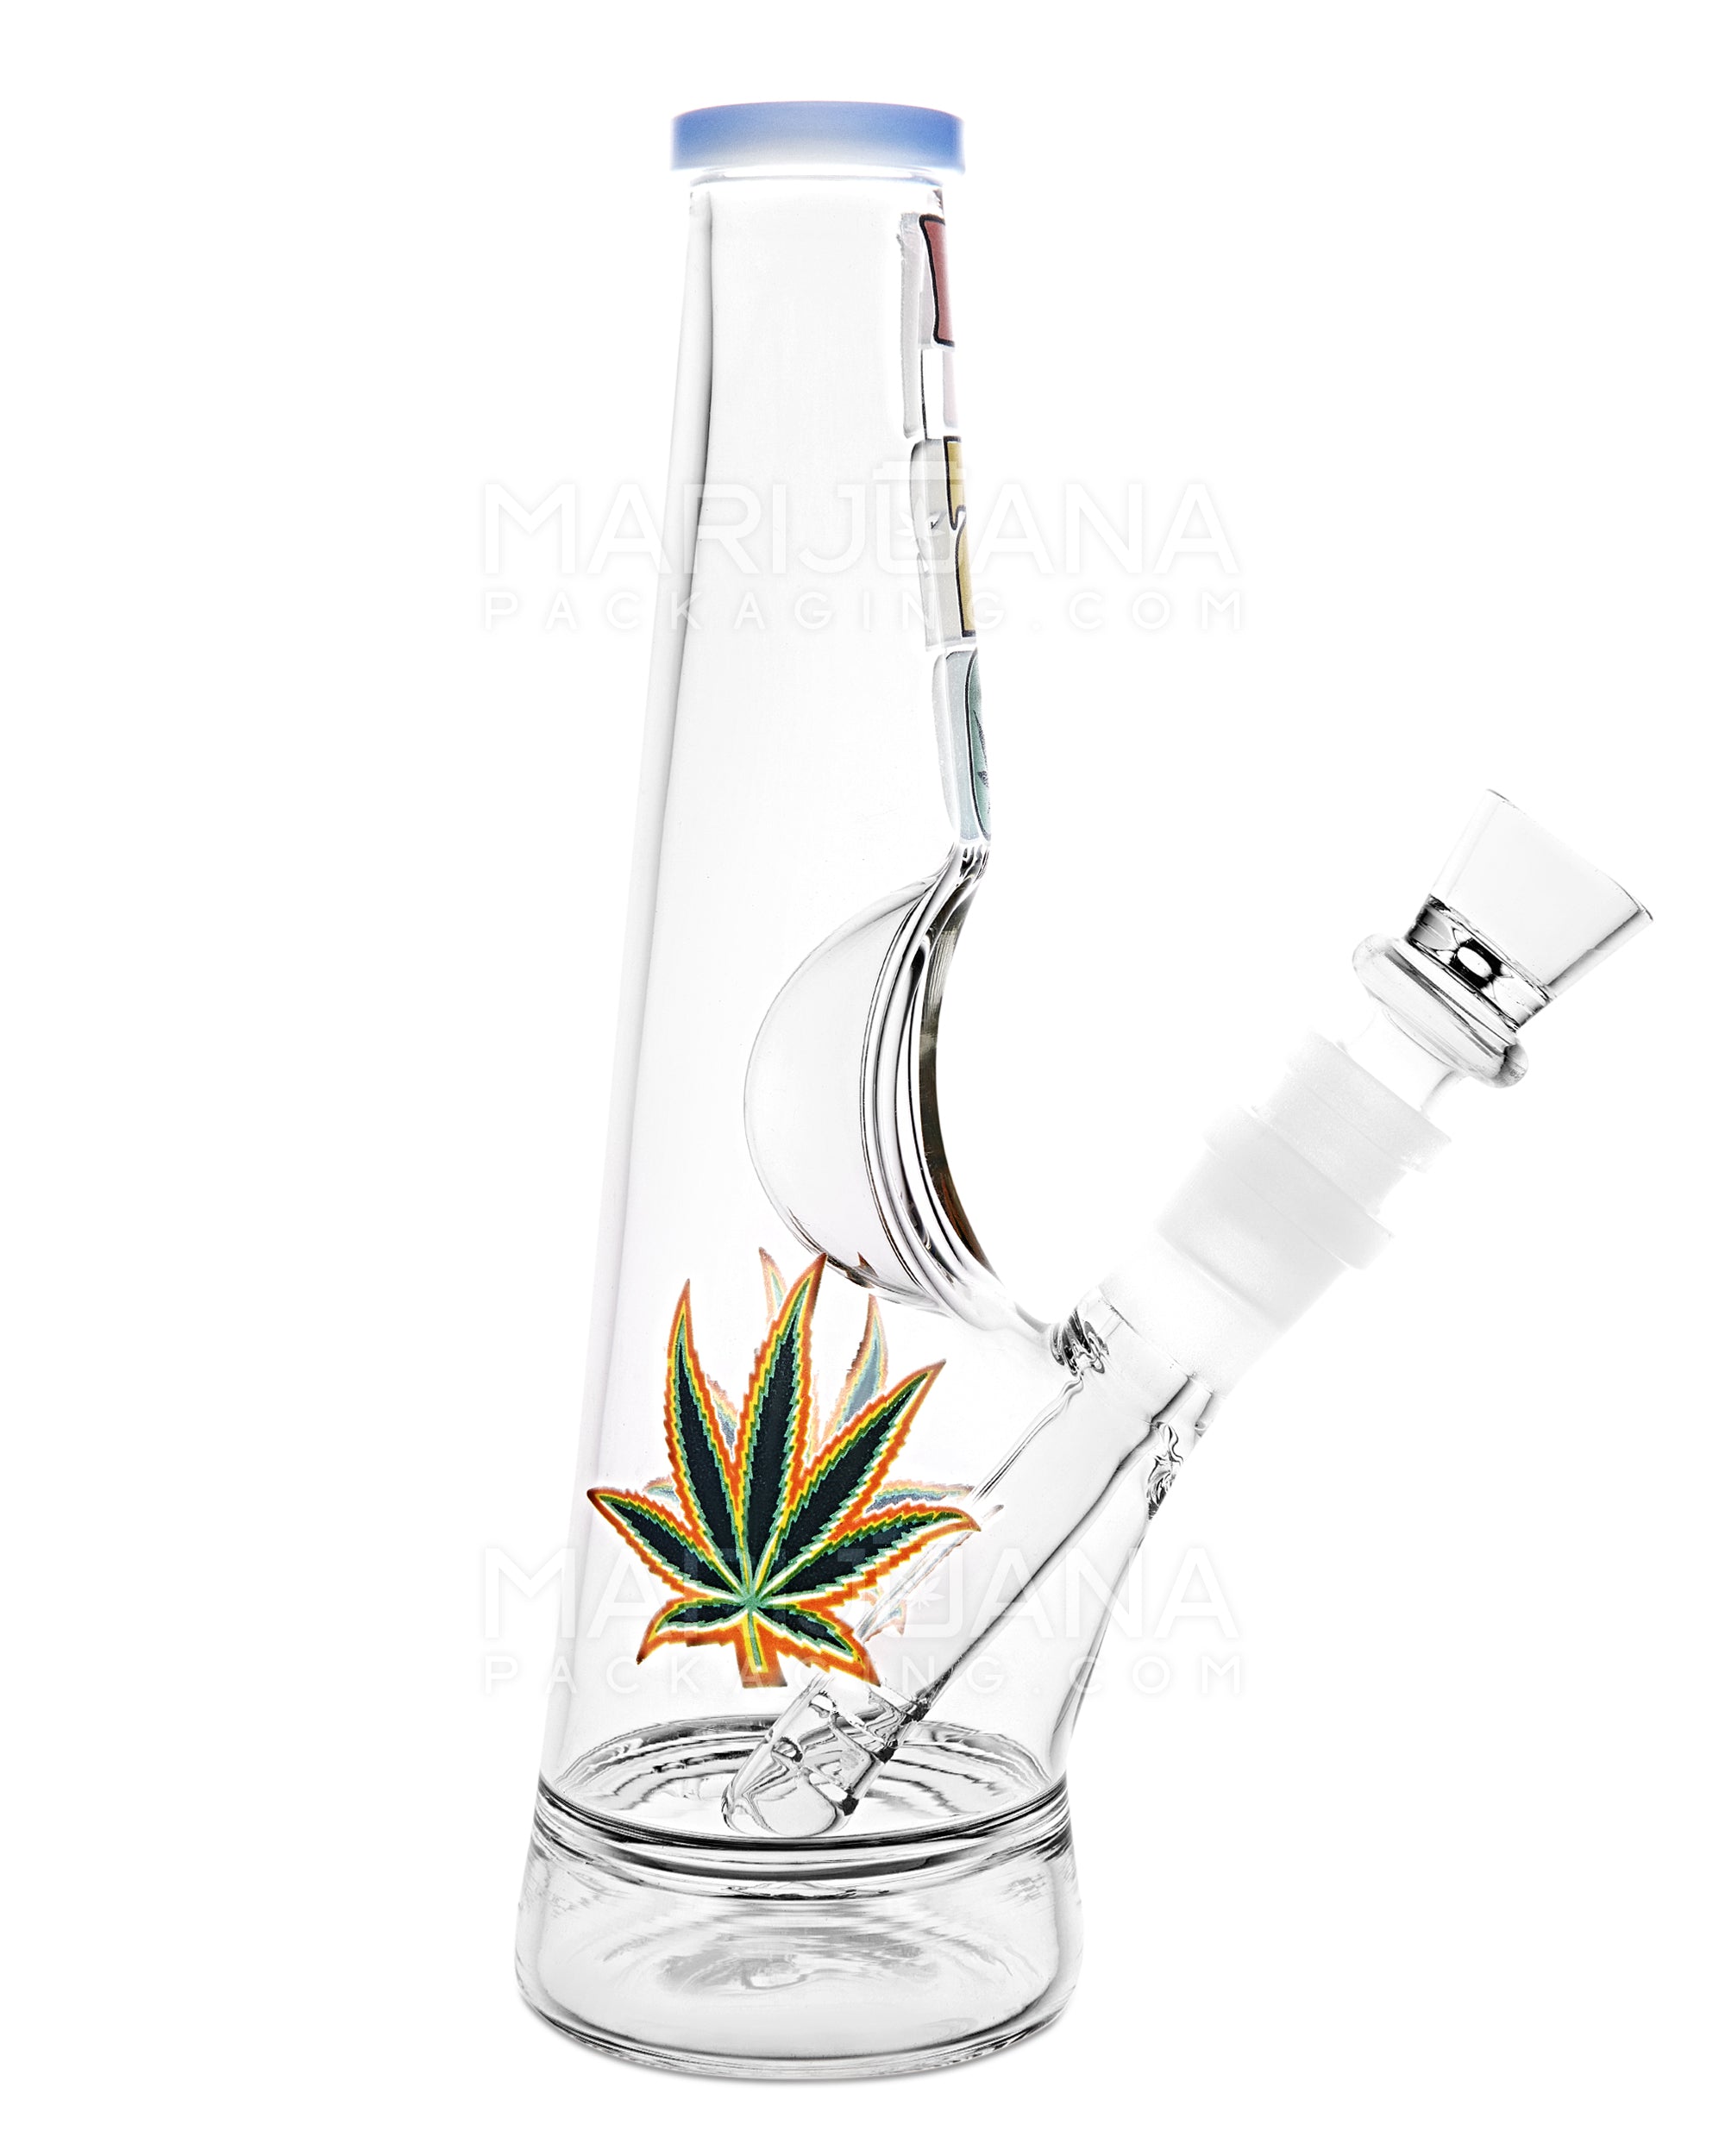 Straight Neck Decal Diffused Glass Cone Water Pipe w/ Ice Catcher | 8.5in Tall - 14mm Bowl - Assorted - 1